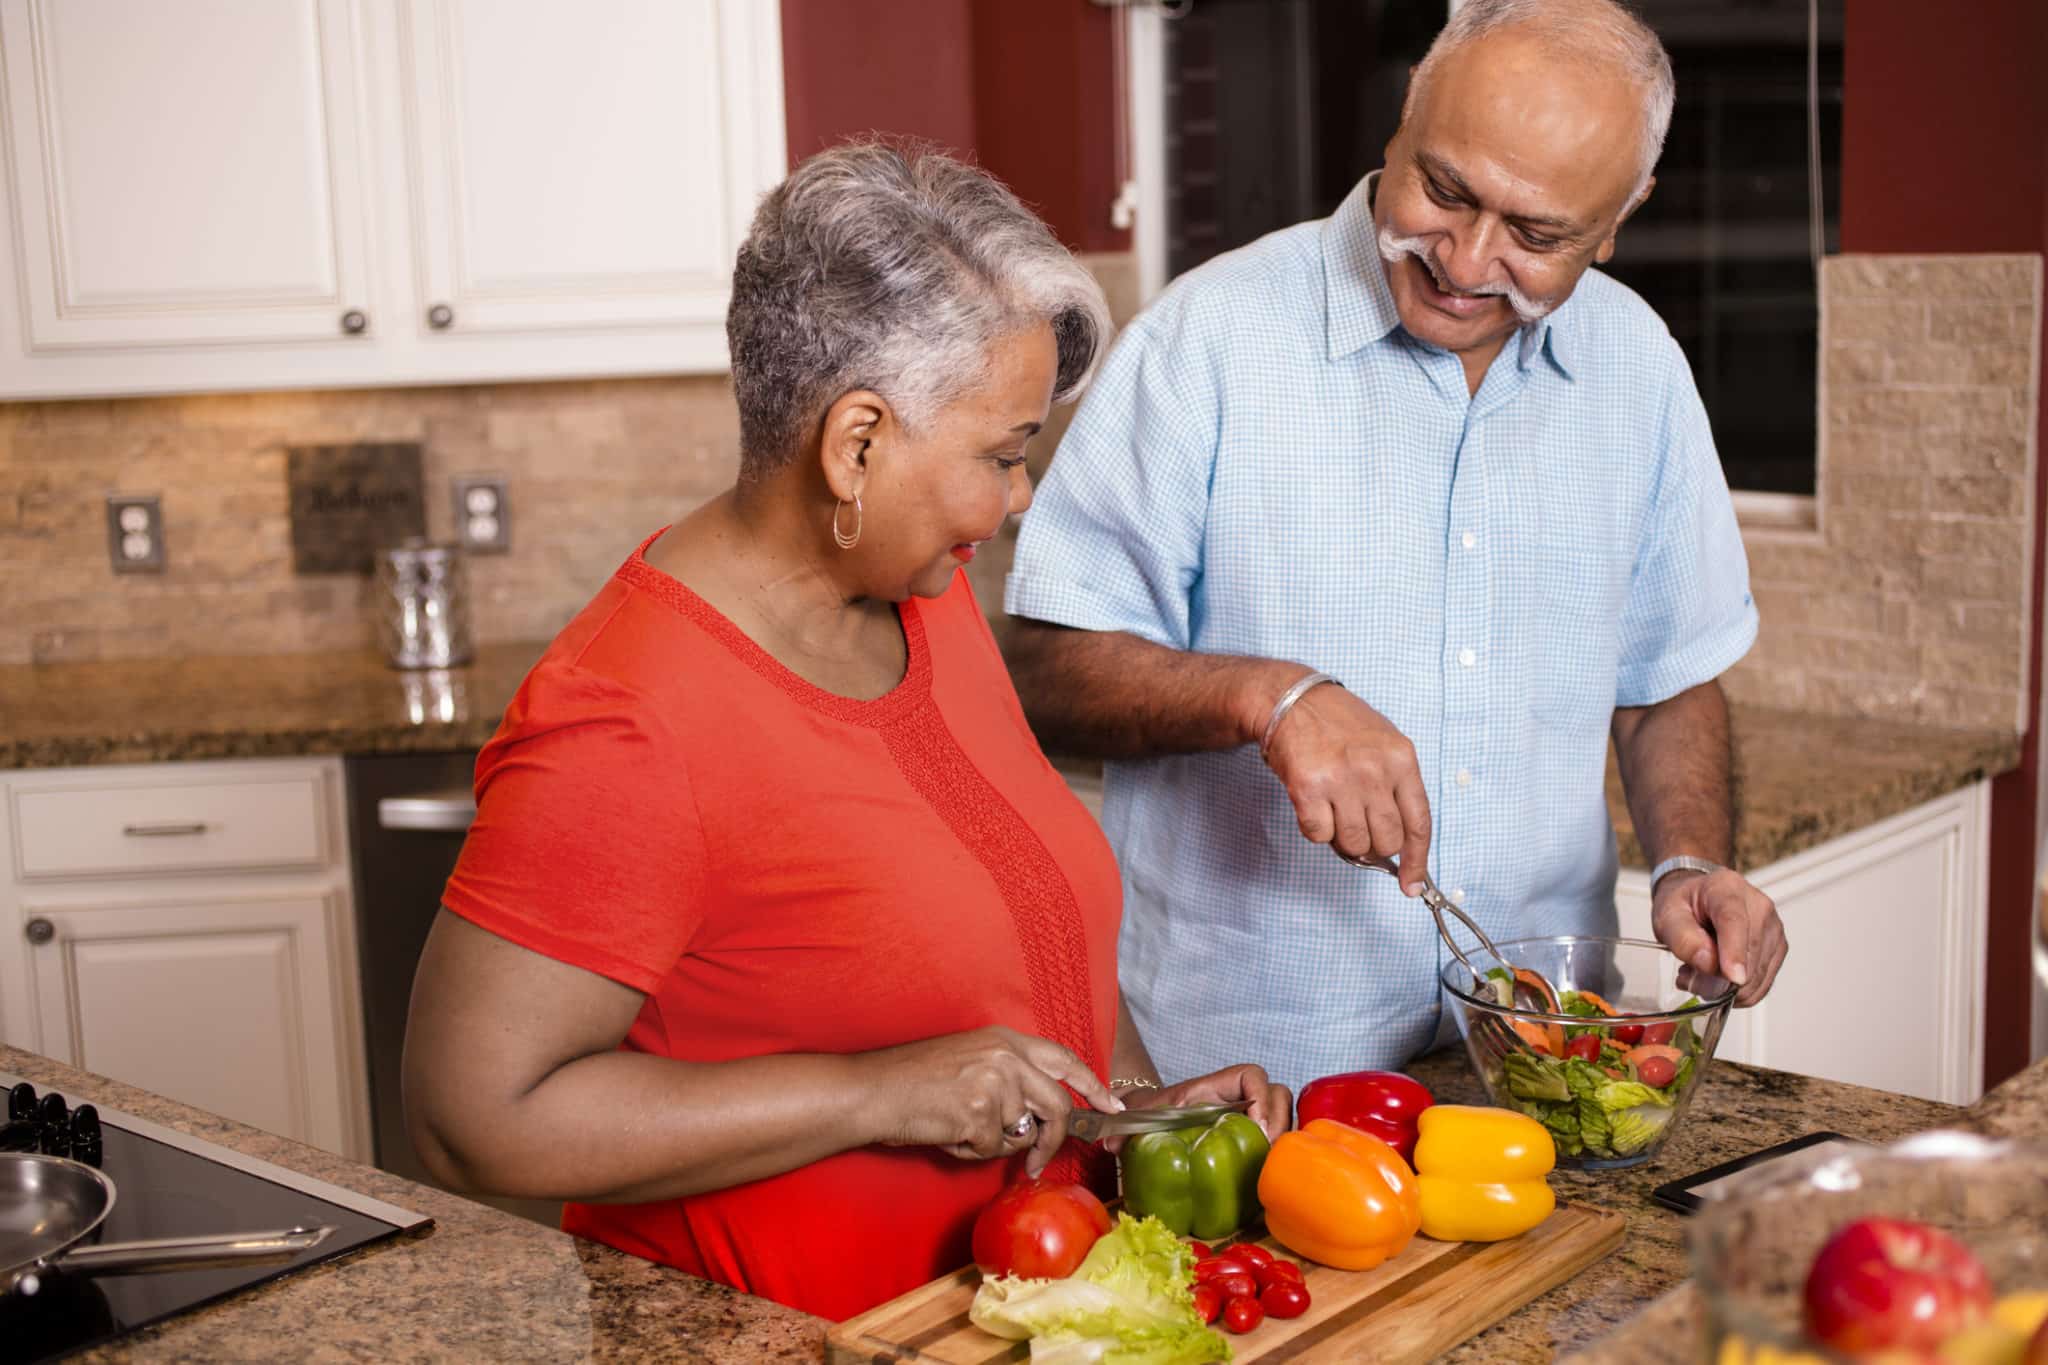 Happy senior adult couple cooking together in home kitchen.